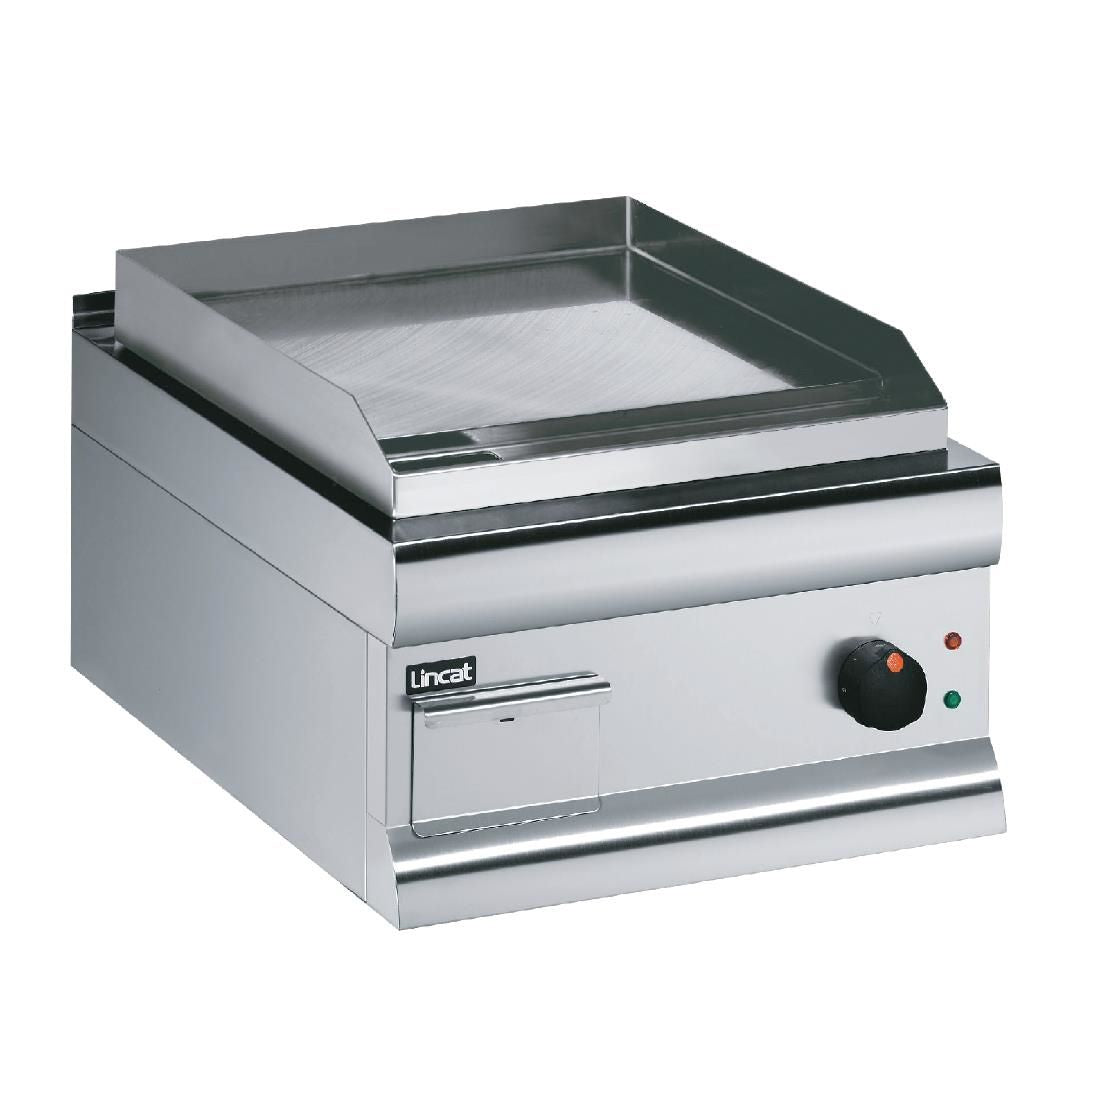 GS4 - Lincat Silverlink 600 Electric Counter-top Griddle - Steel Plate - W 450 mm - 2.7 kW JD Catering Equipment Solutions Ltd